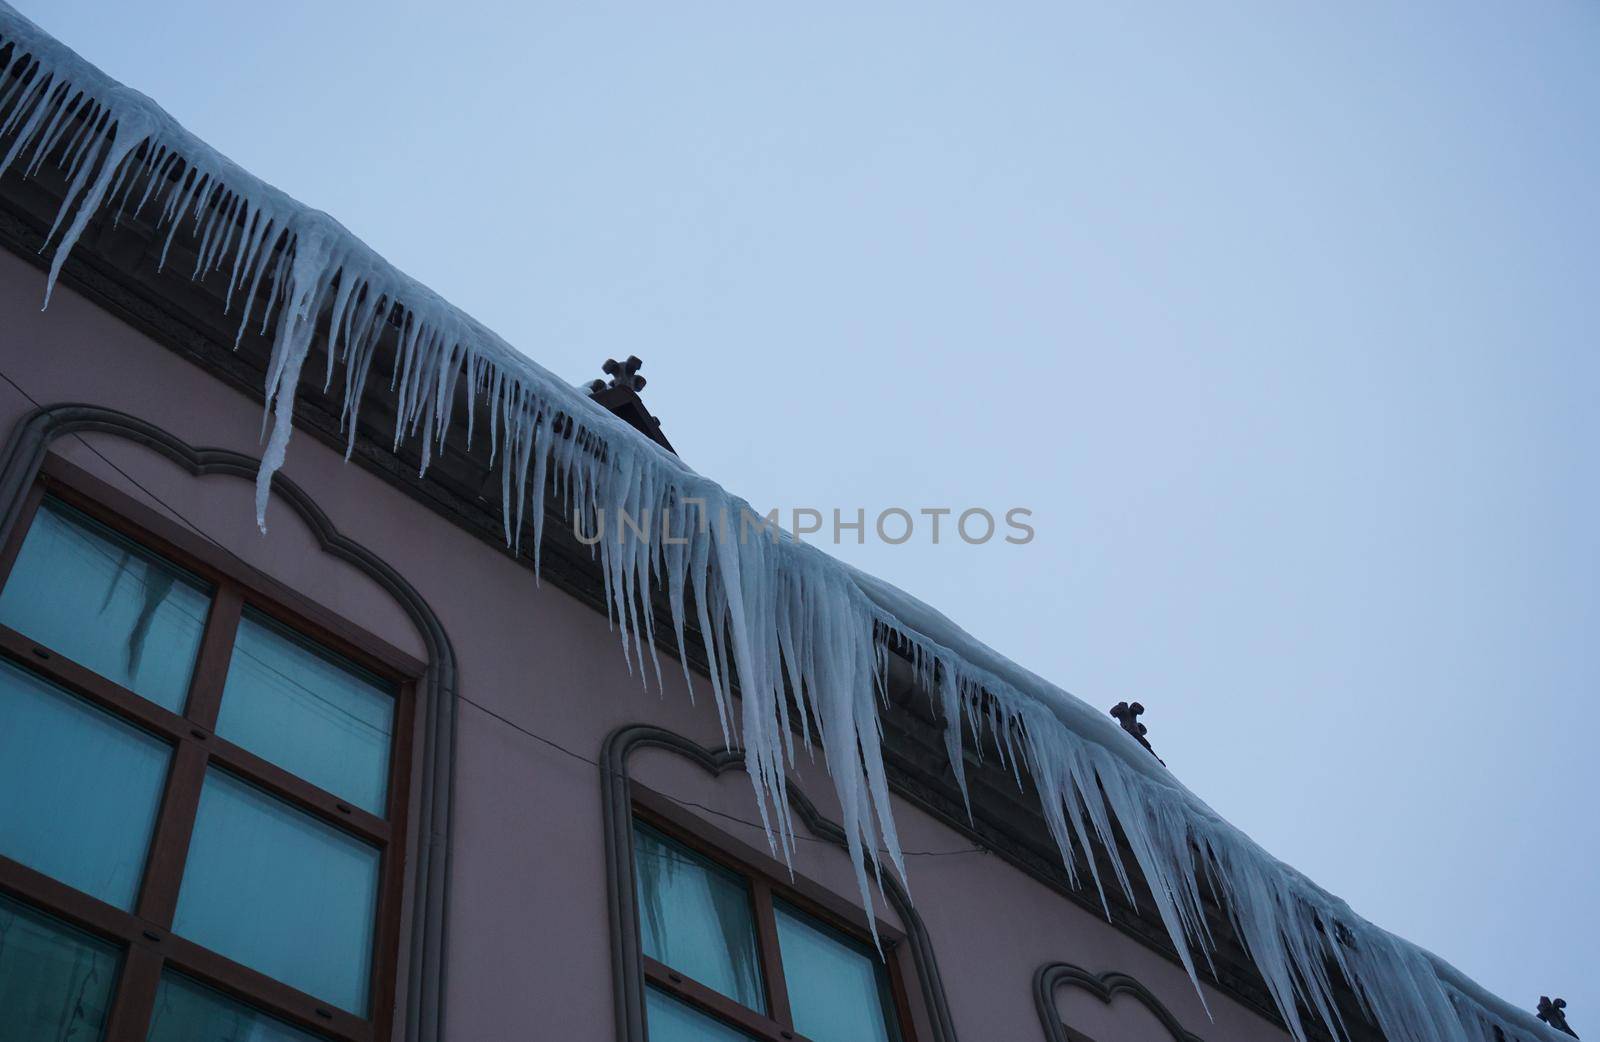 Large icicles of ice hang on the roof of the house by Spirina